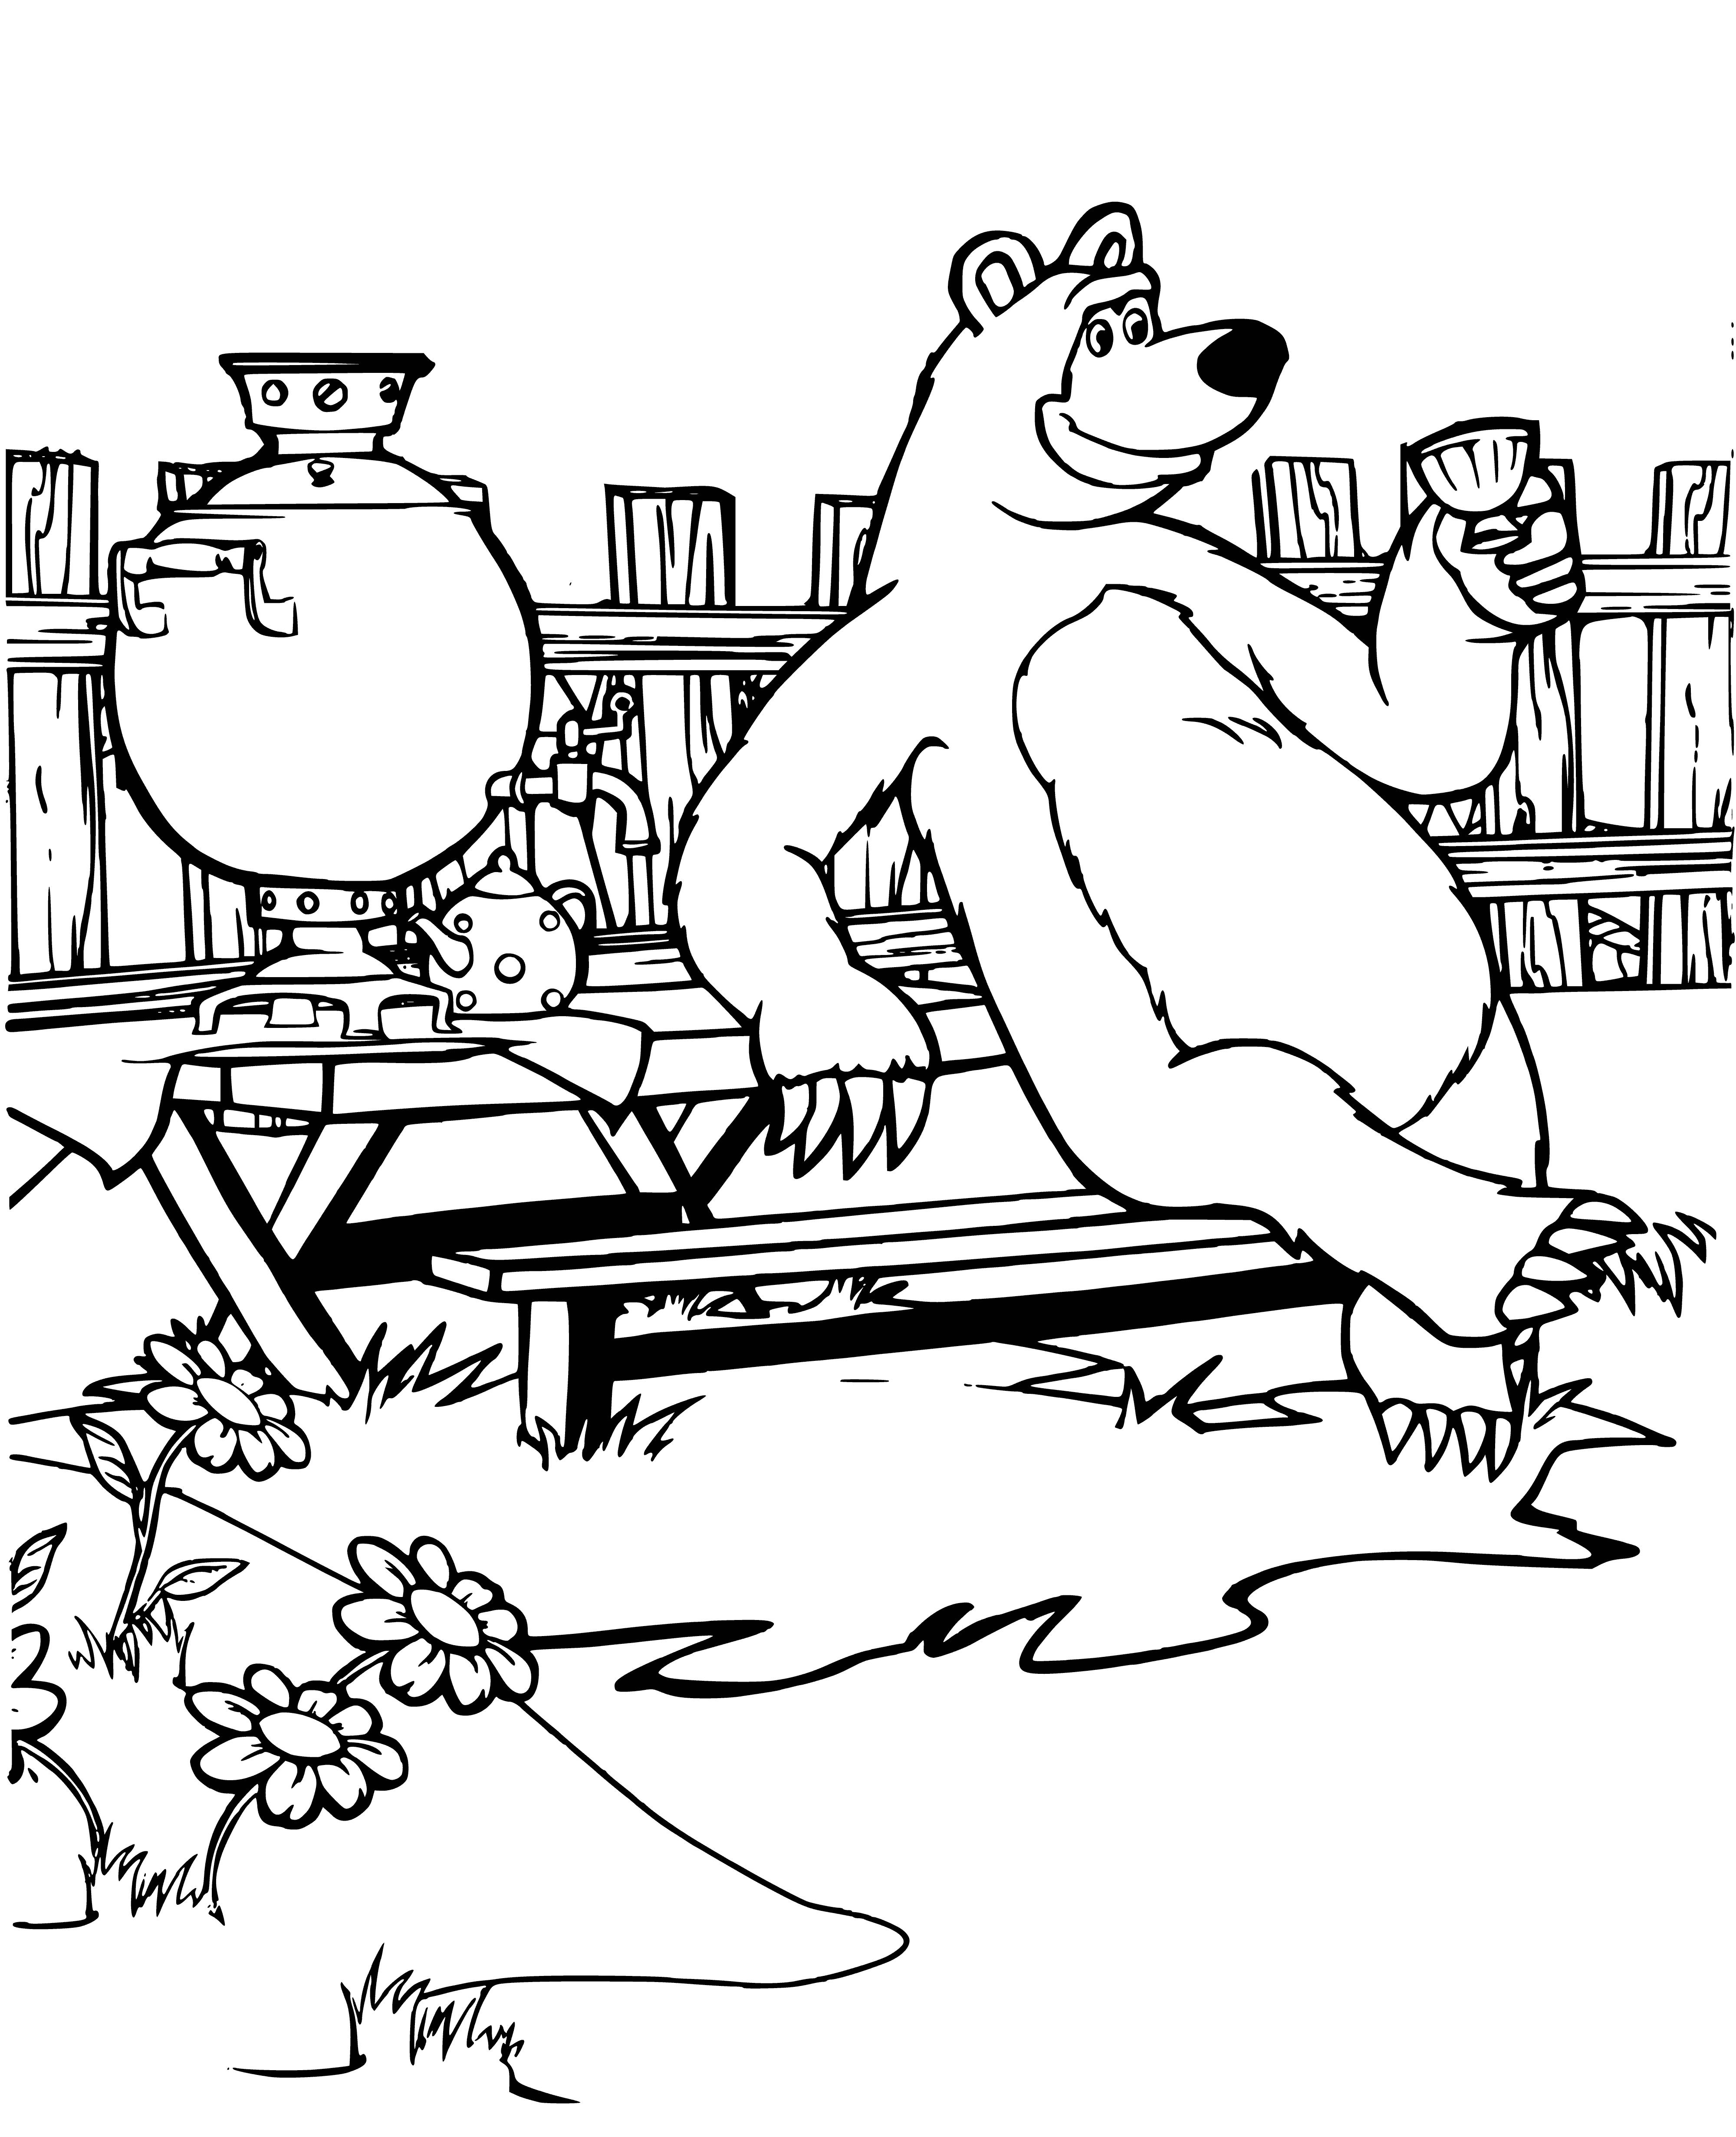 coloring page: Girl pours tea for stern-looking bear on coloring page. He doesn't seem pleased.